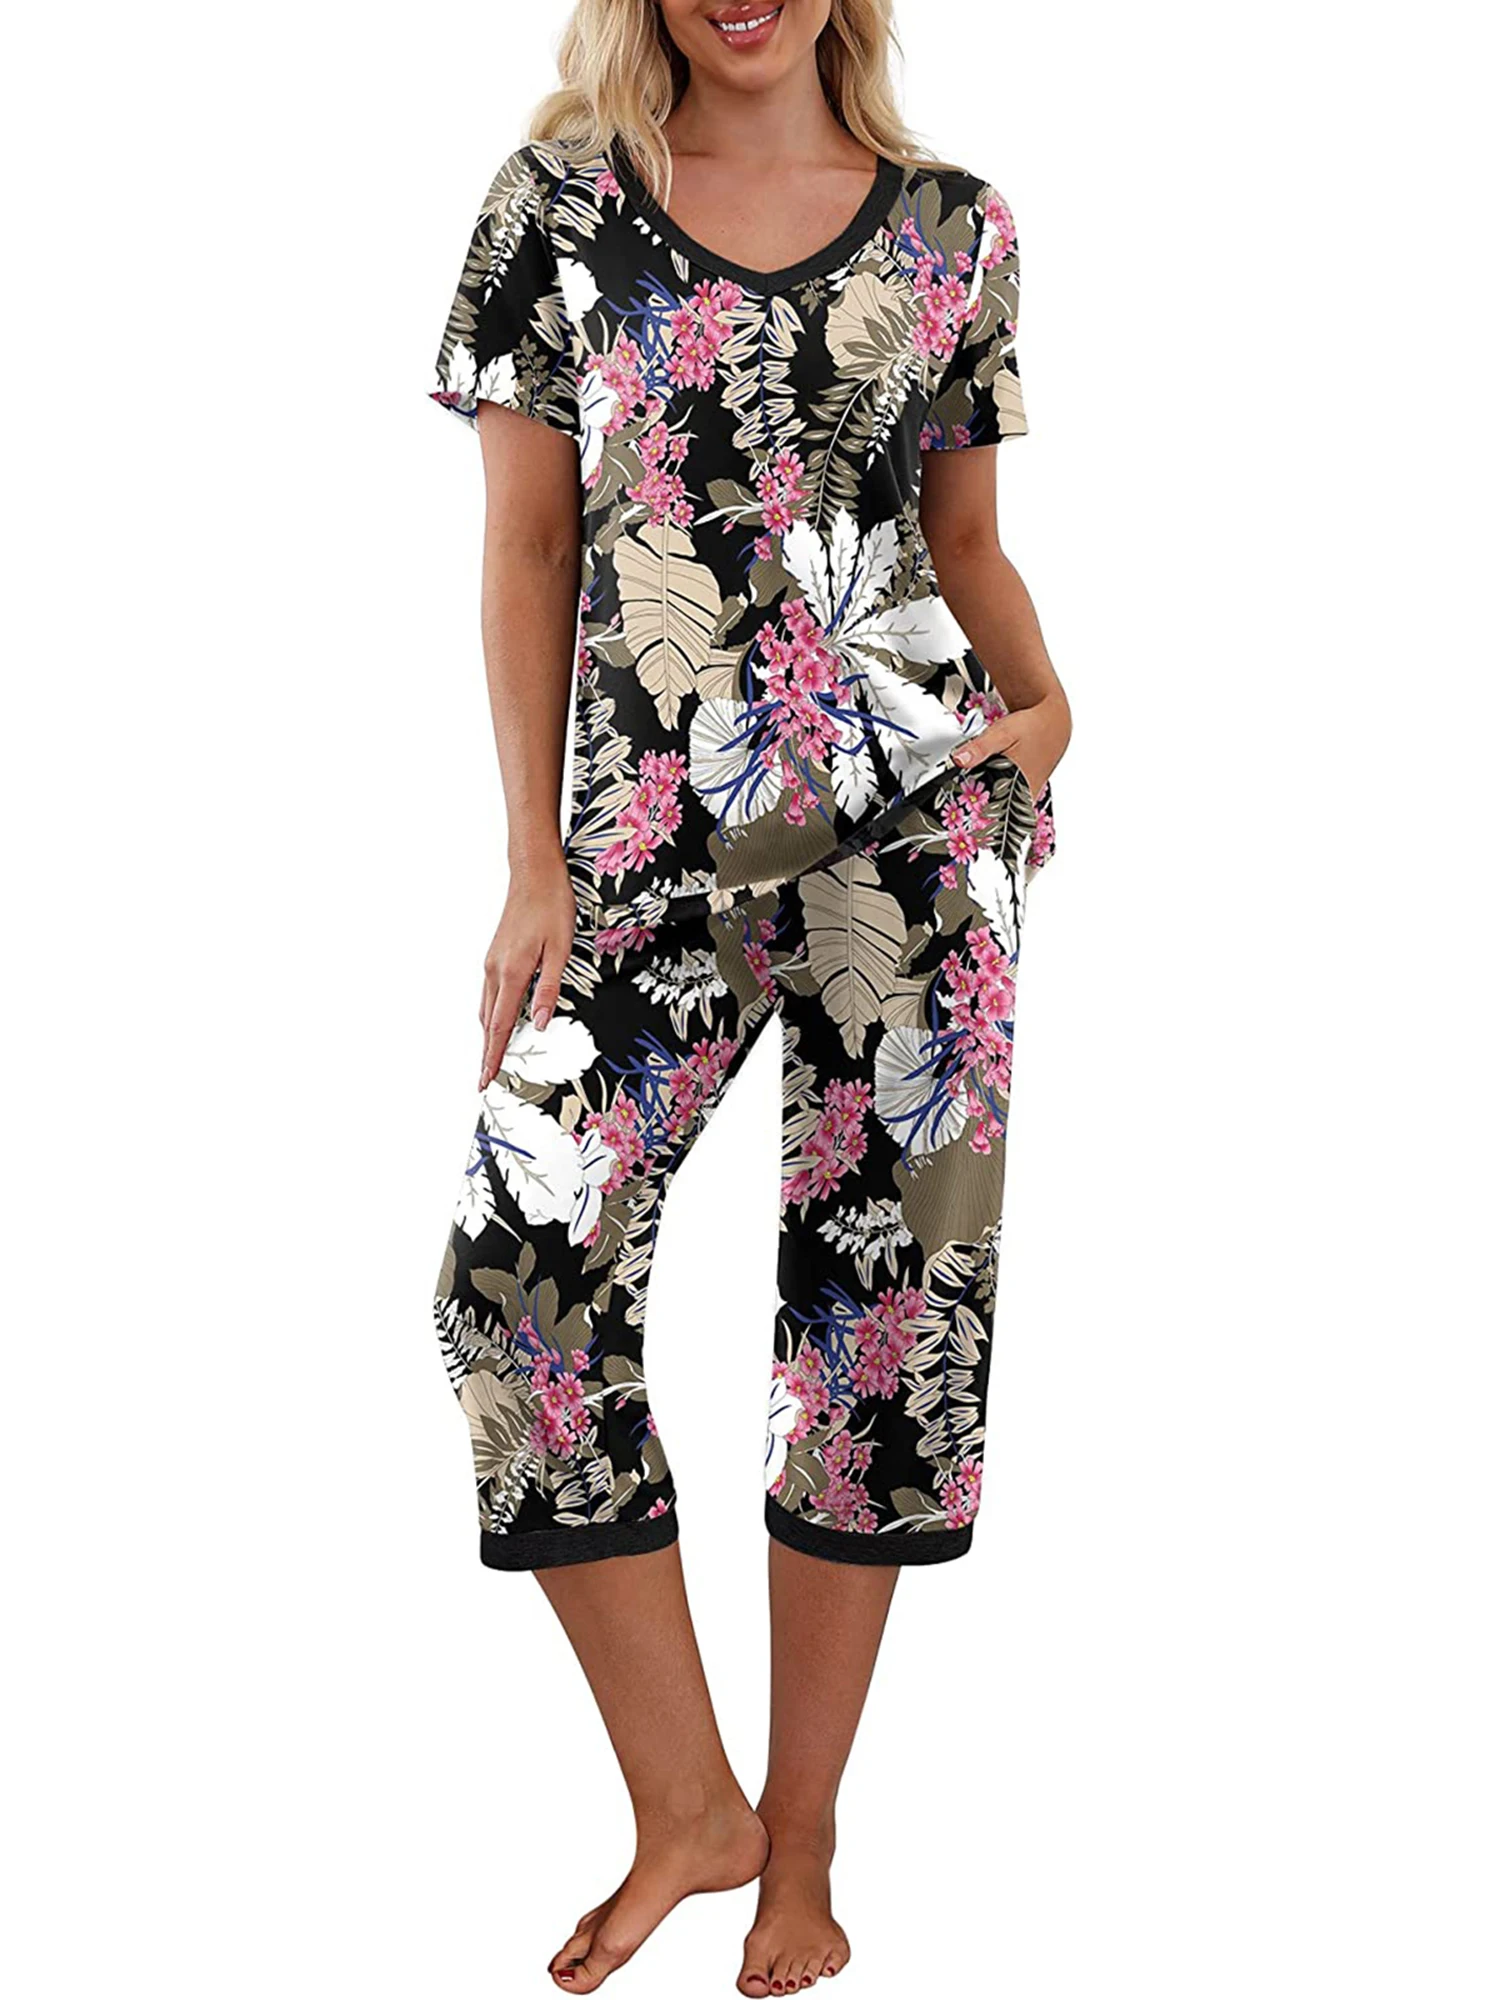 

Women s Floral Print Short Sleeve Pajama Set with Capri Pants and Pockets - Comfortable Loungewear for Nightwear and Sleepwear